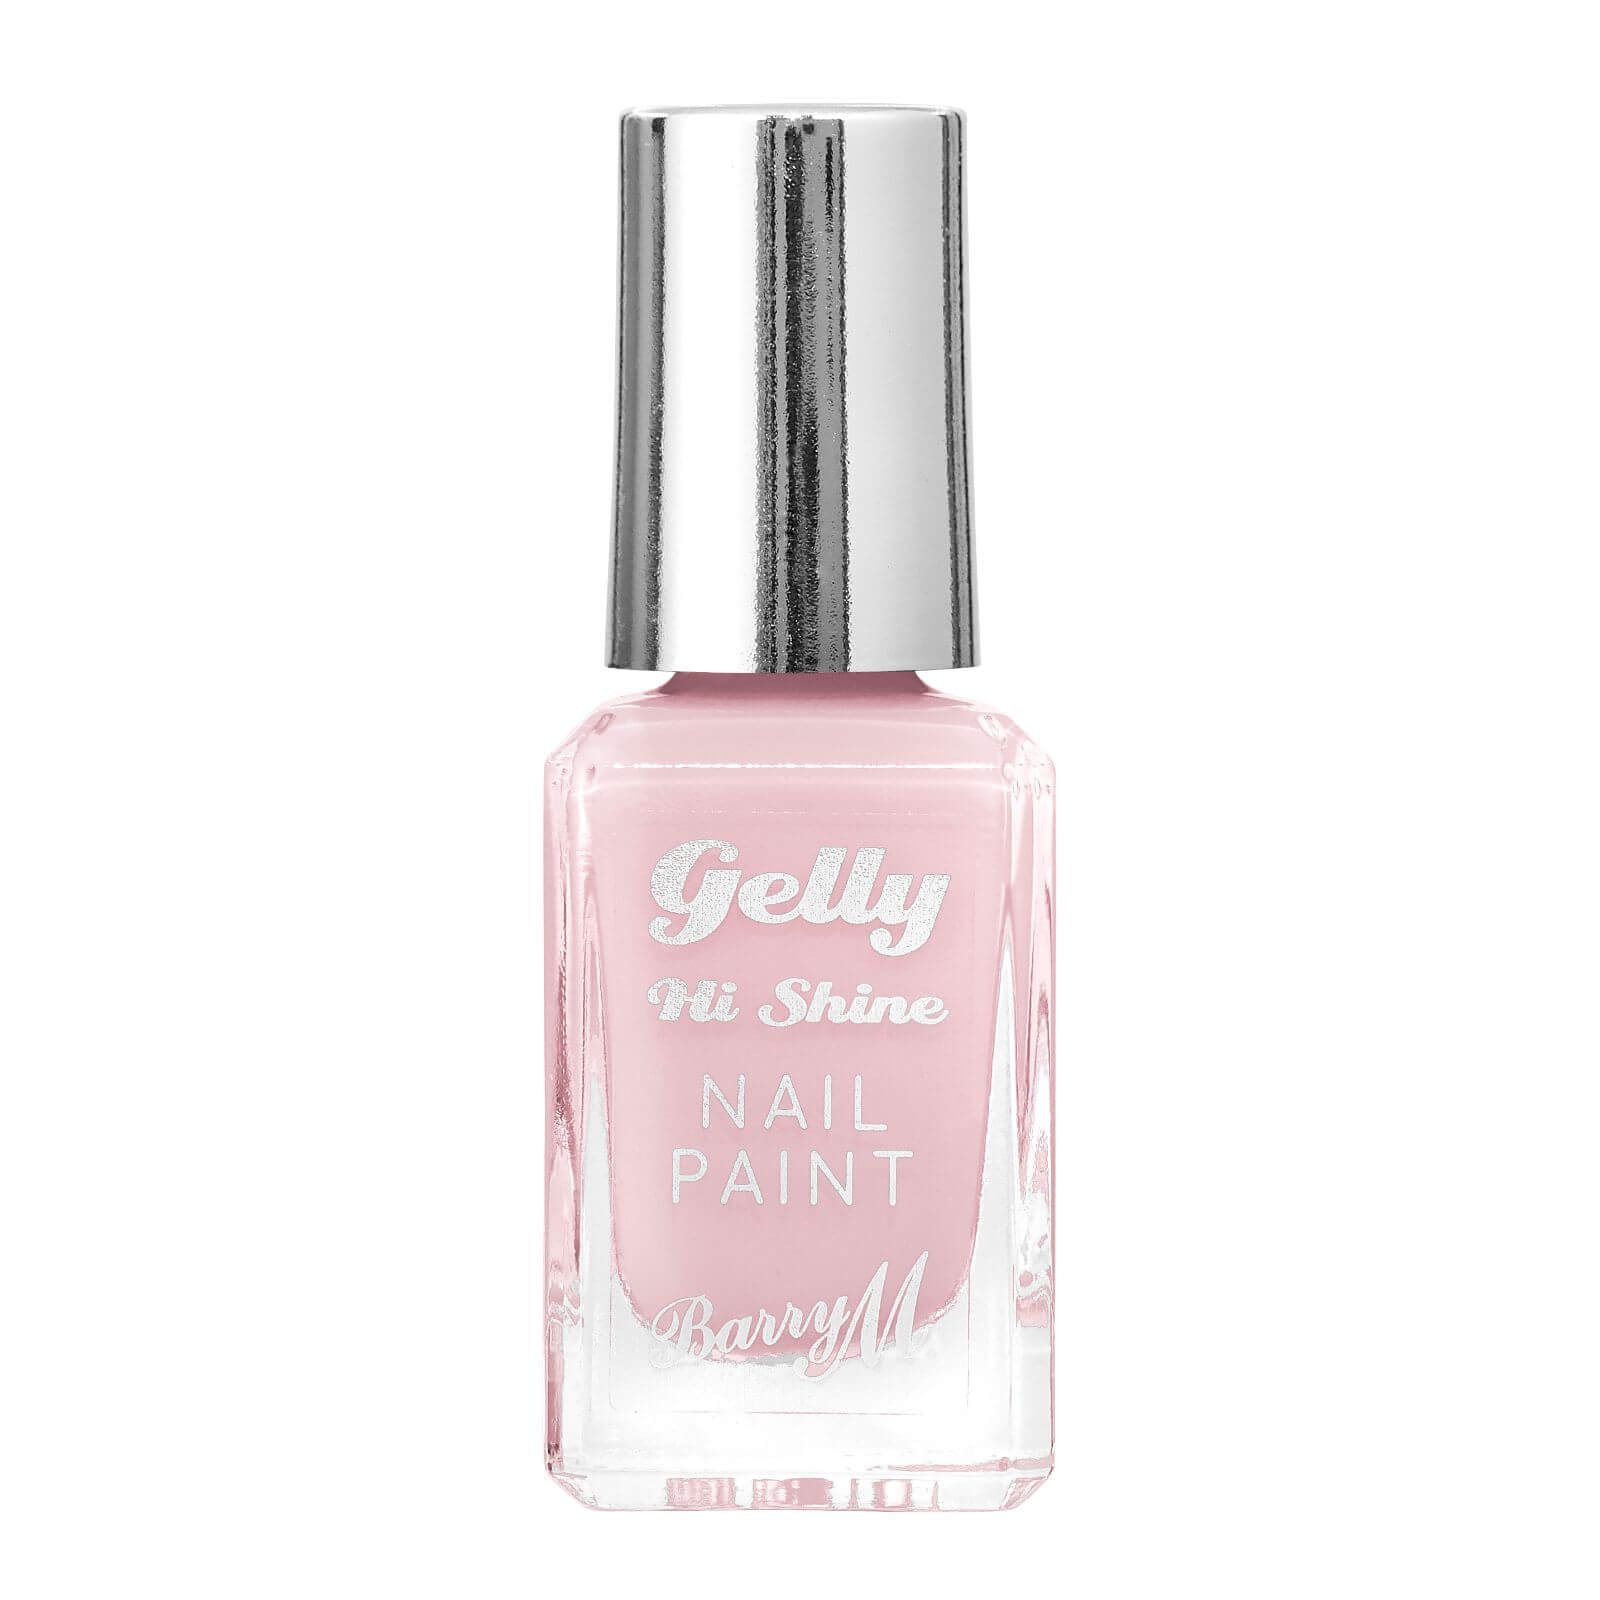 Image of Barry M Cosmetics Gelly Hi Shine Nail Paint 10ml (Various Shades) - Candy Floss